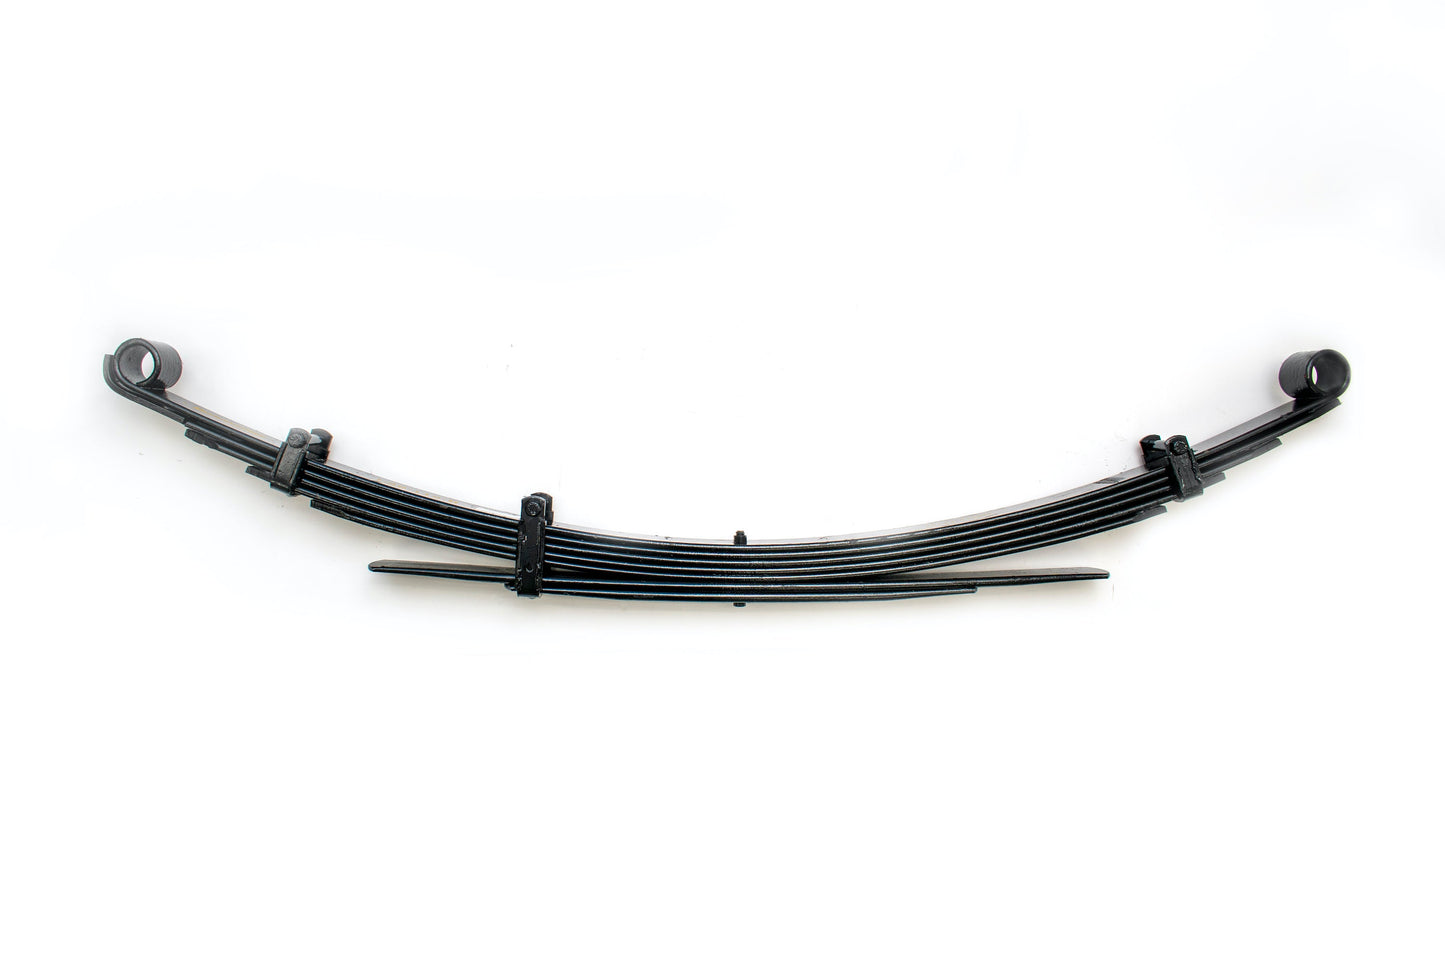 Dobinsons Rear Leaf Springs Pair for Toyota Tacoma 2005 to 2022 (L59-112-R)